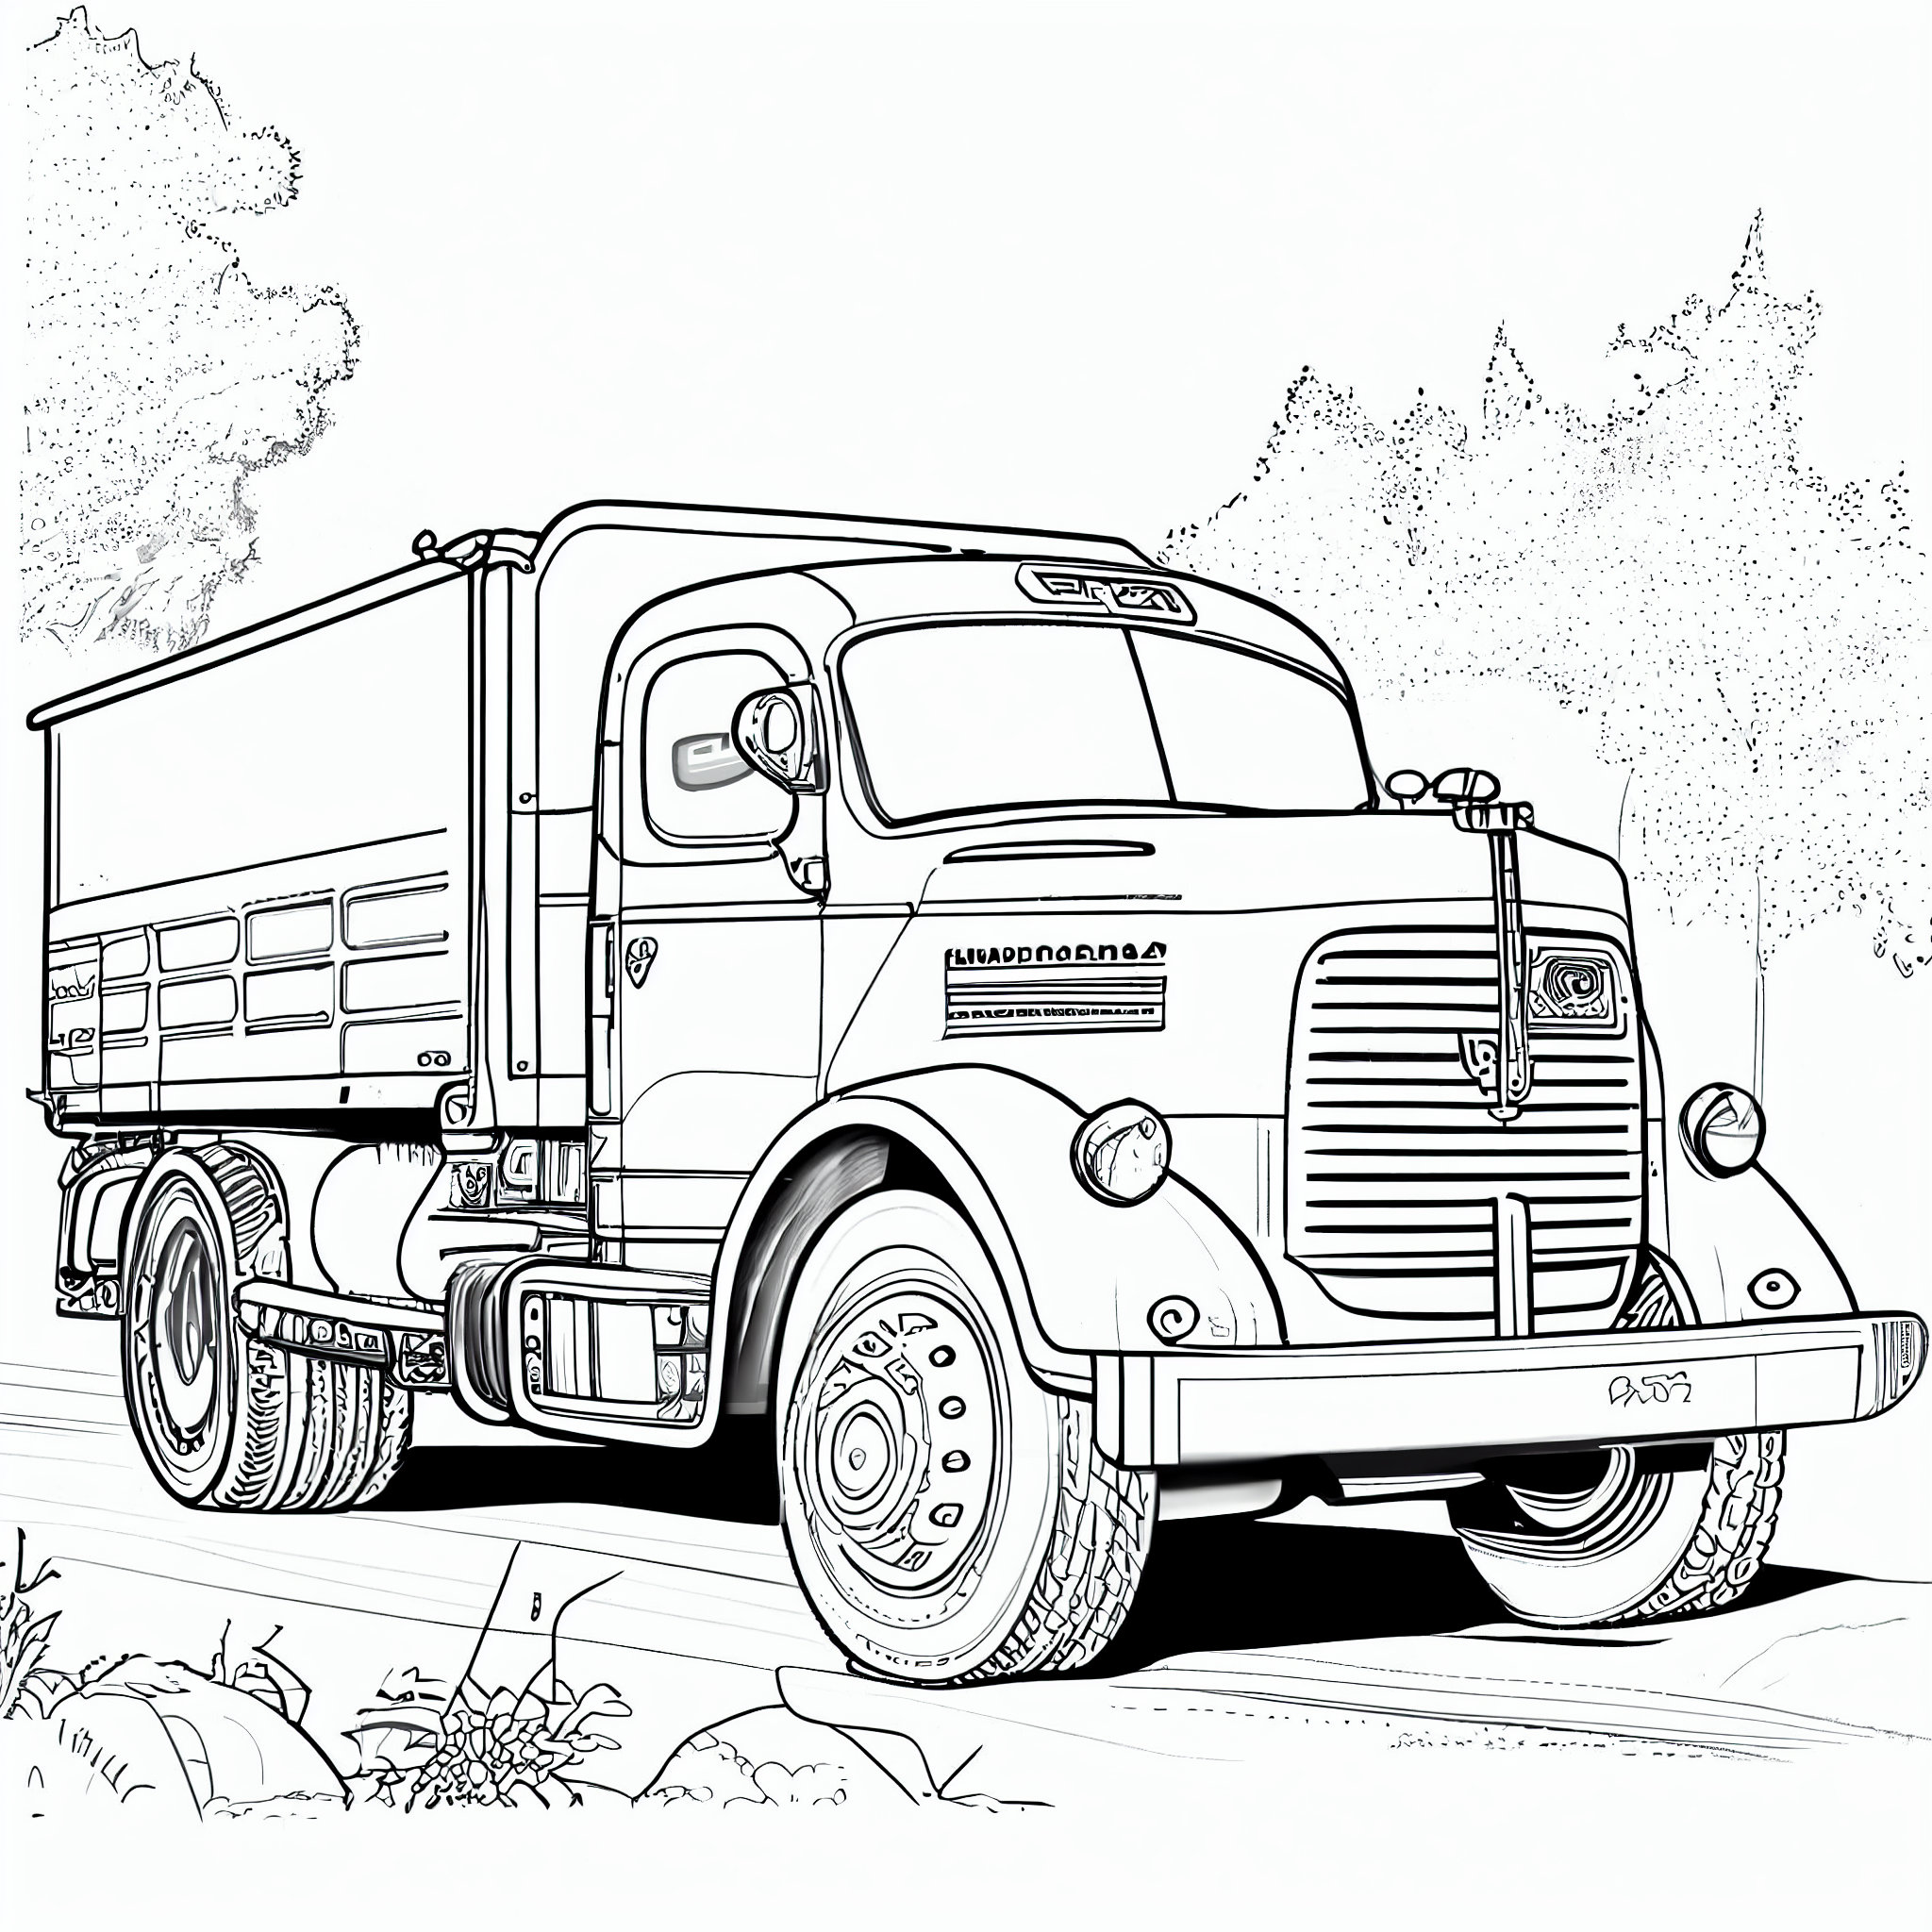 Trucks galore exciting coloring pages for kids pages instant download print paint